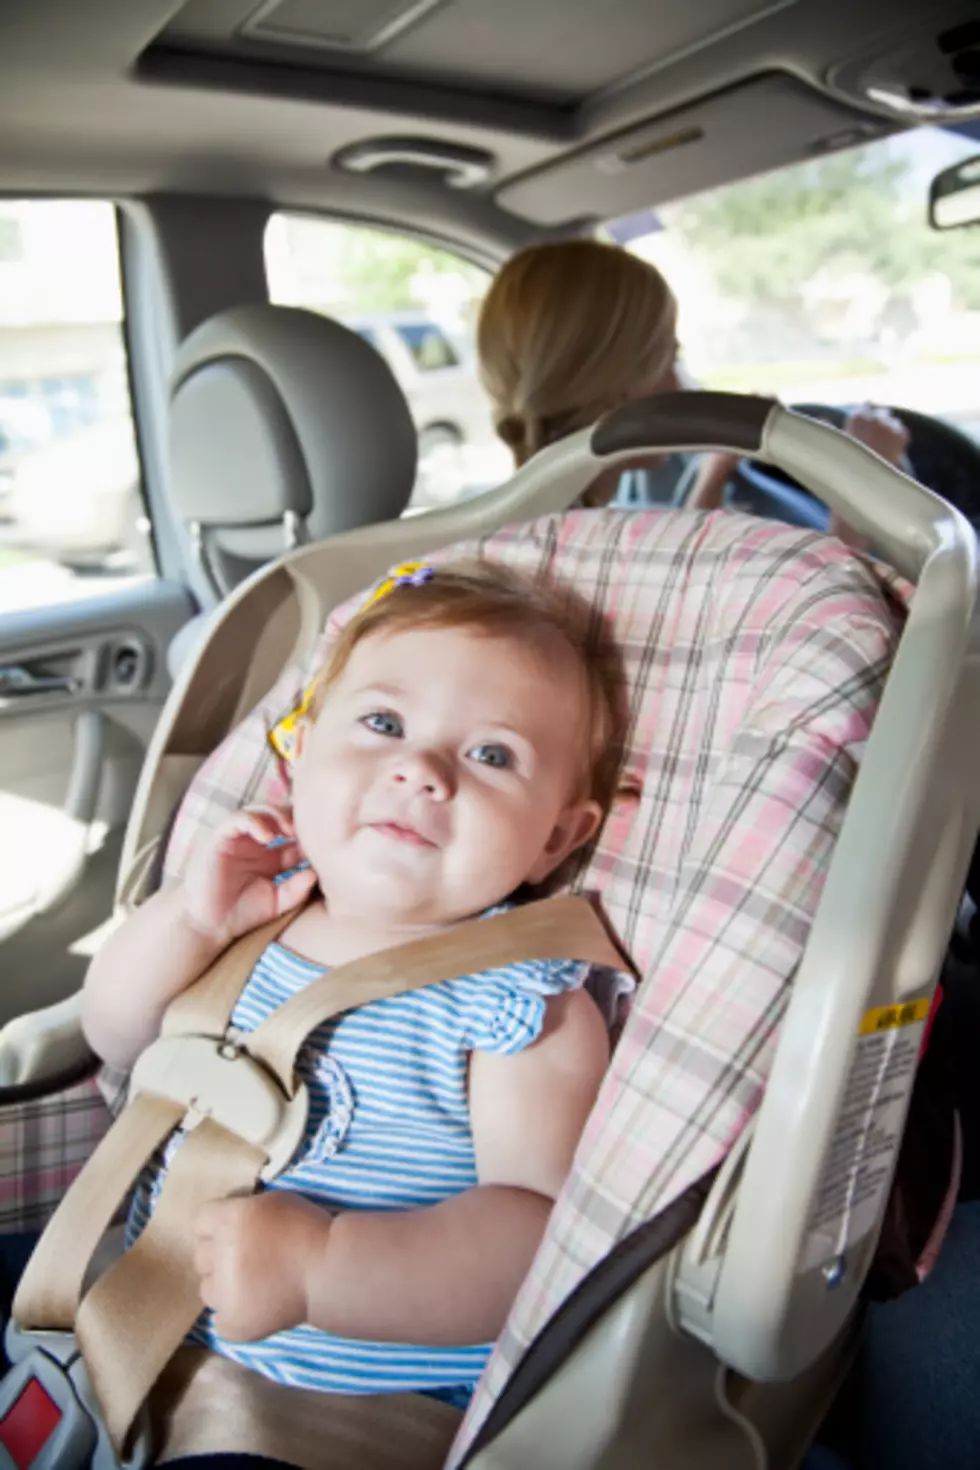 New Illinois Law: Kids in Rear-Facing Seats Until Age 2